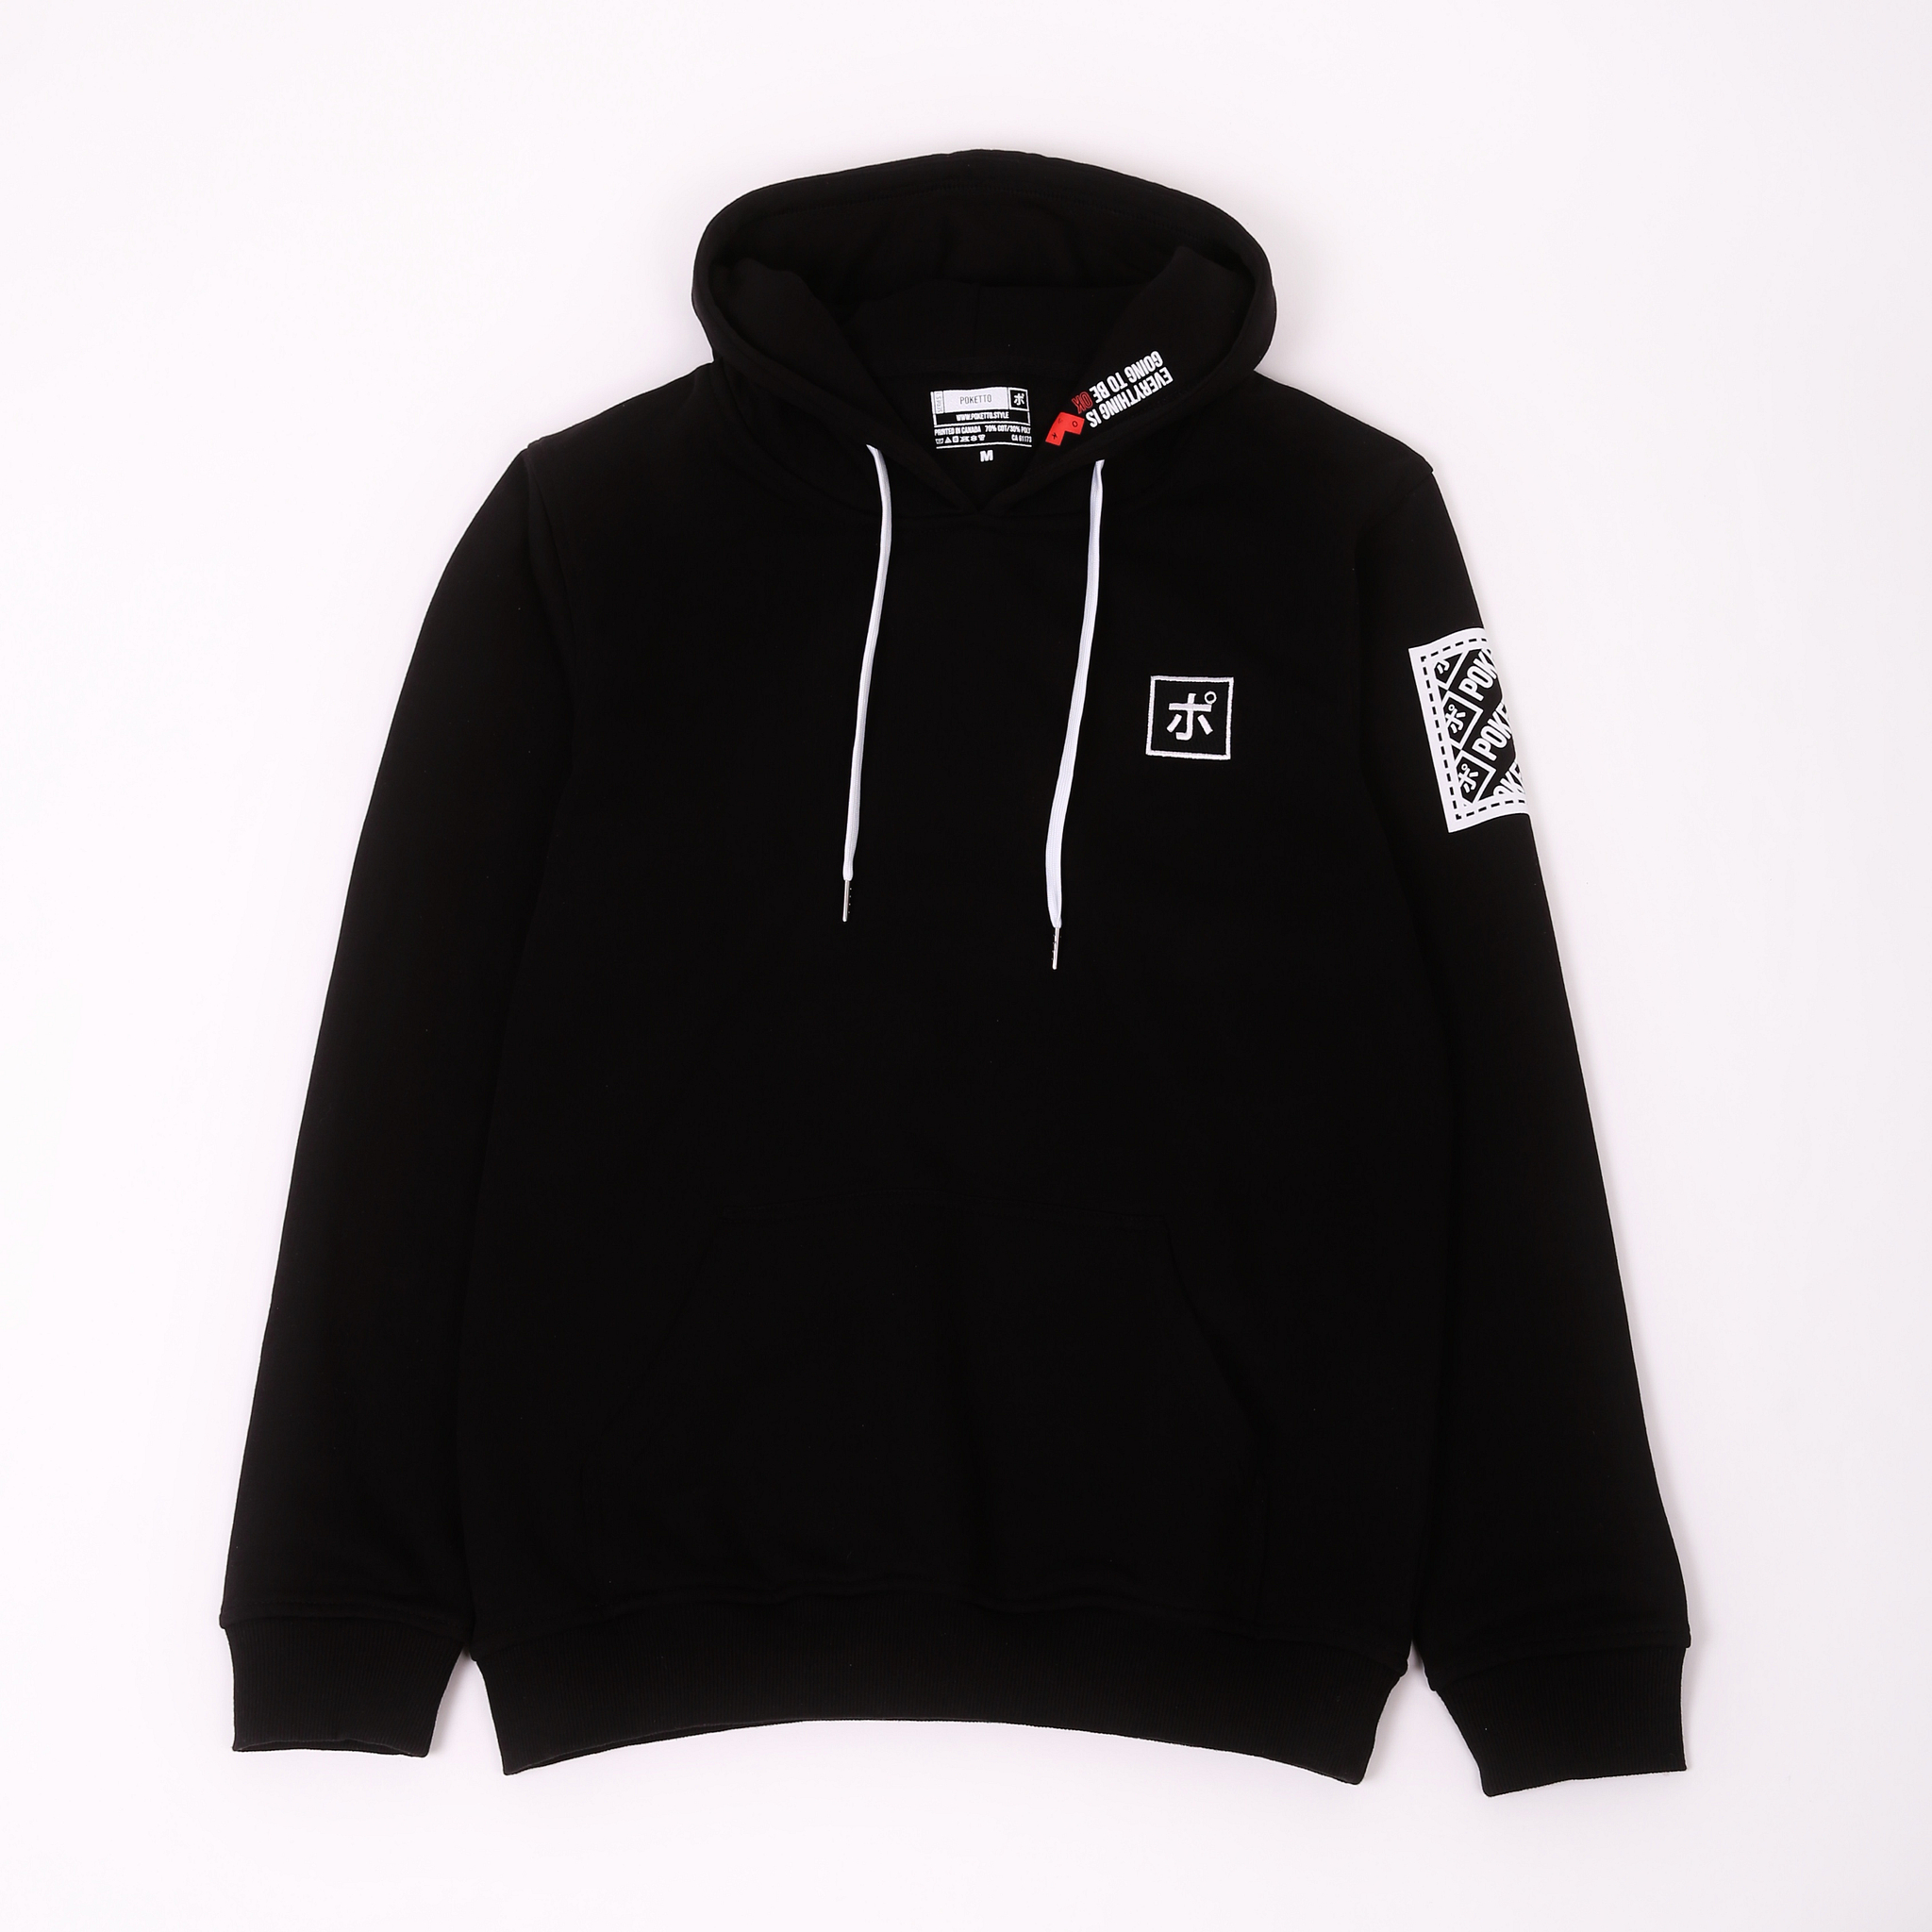 Series 1 Hoodie : Pilot Off-style [ Sold Out ]